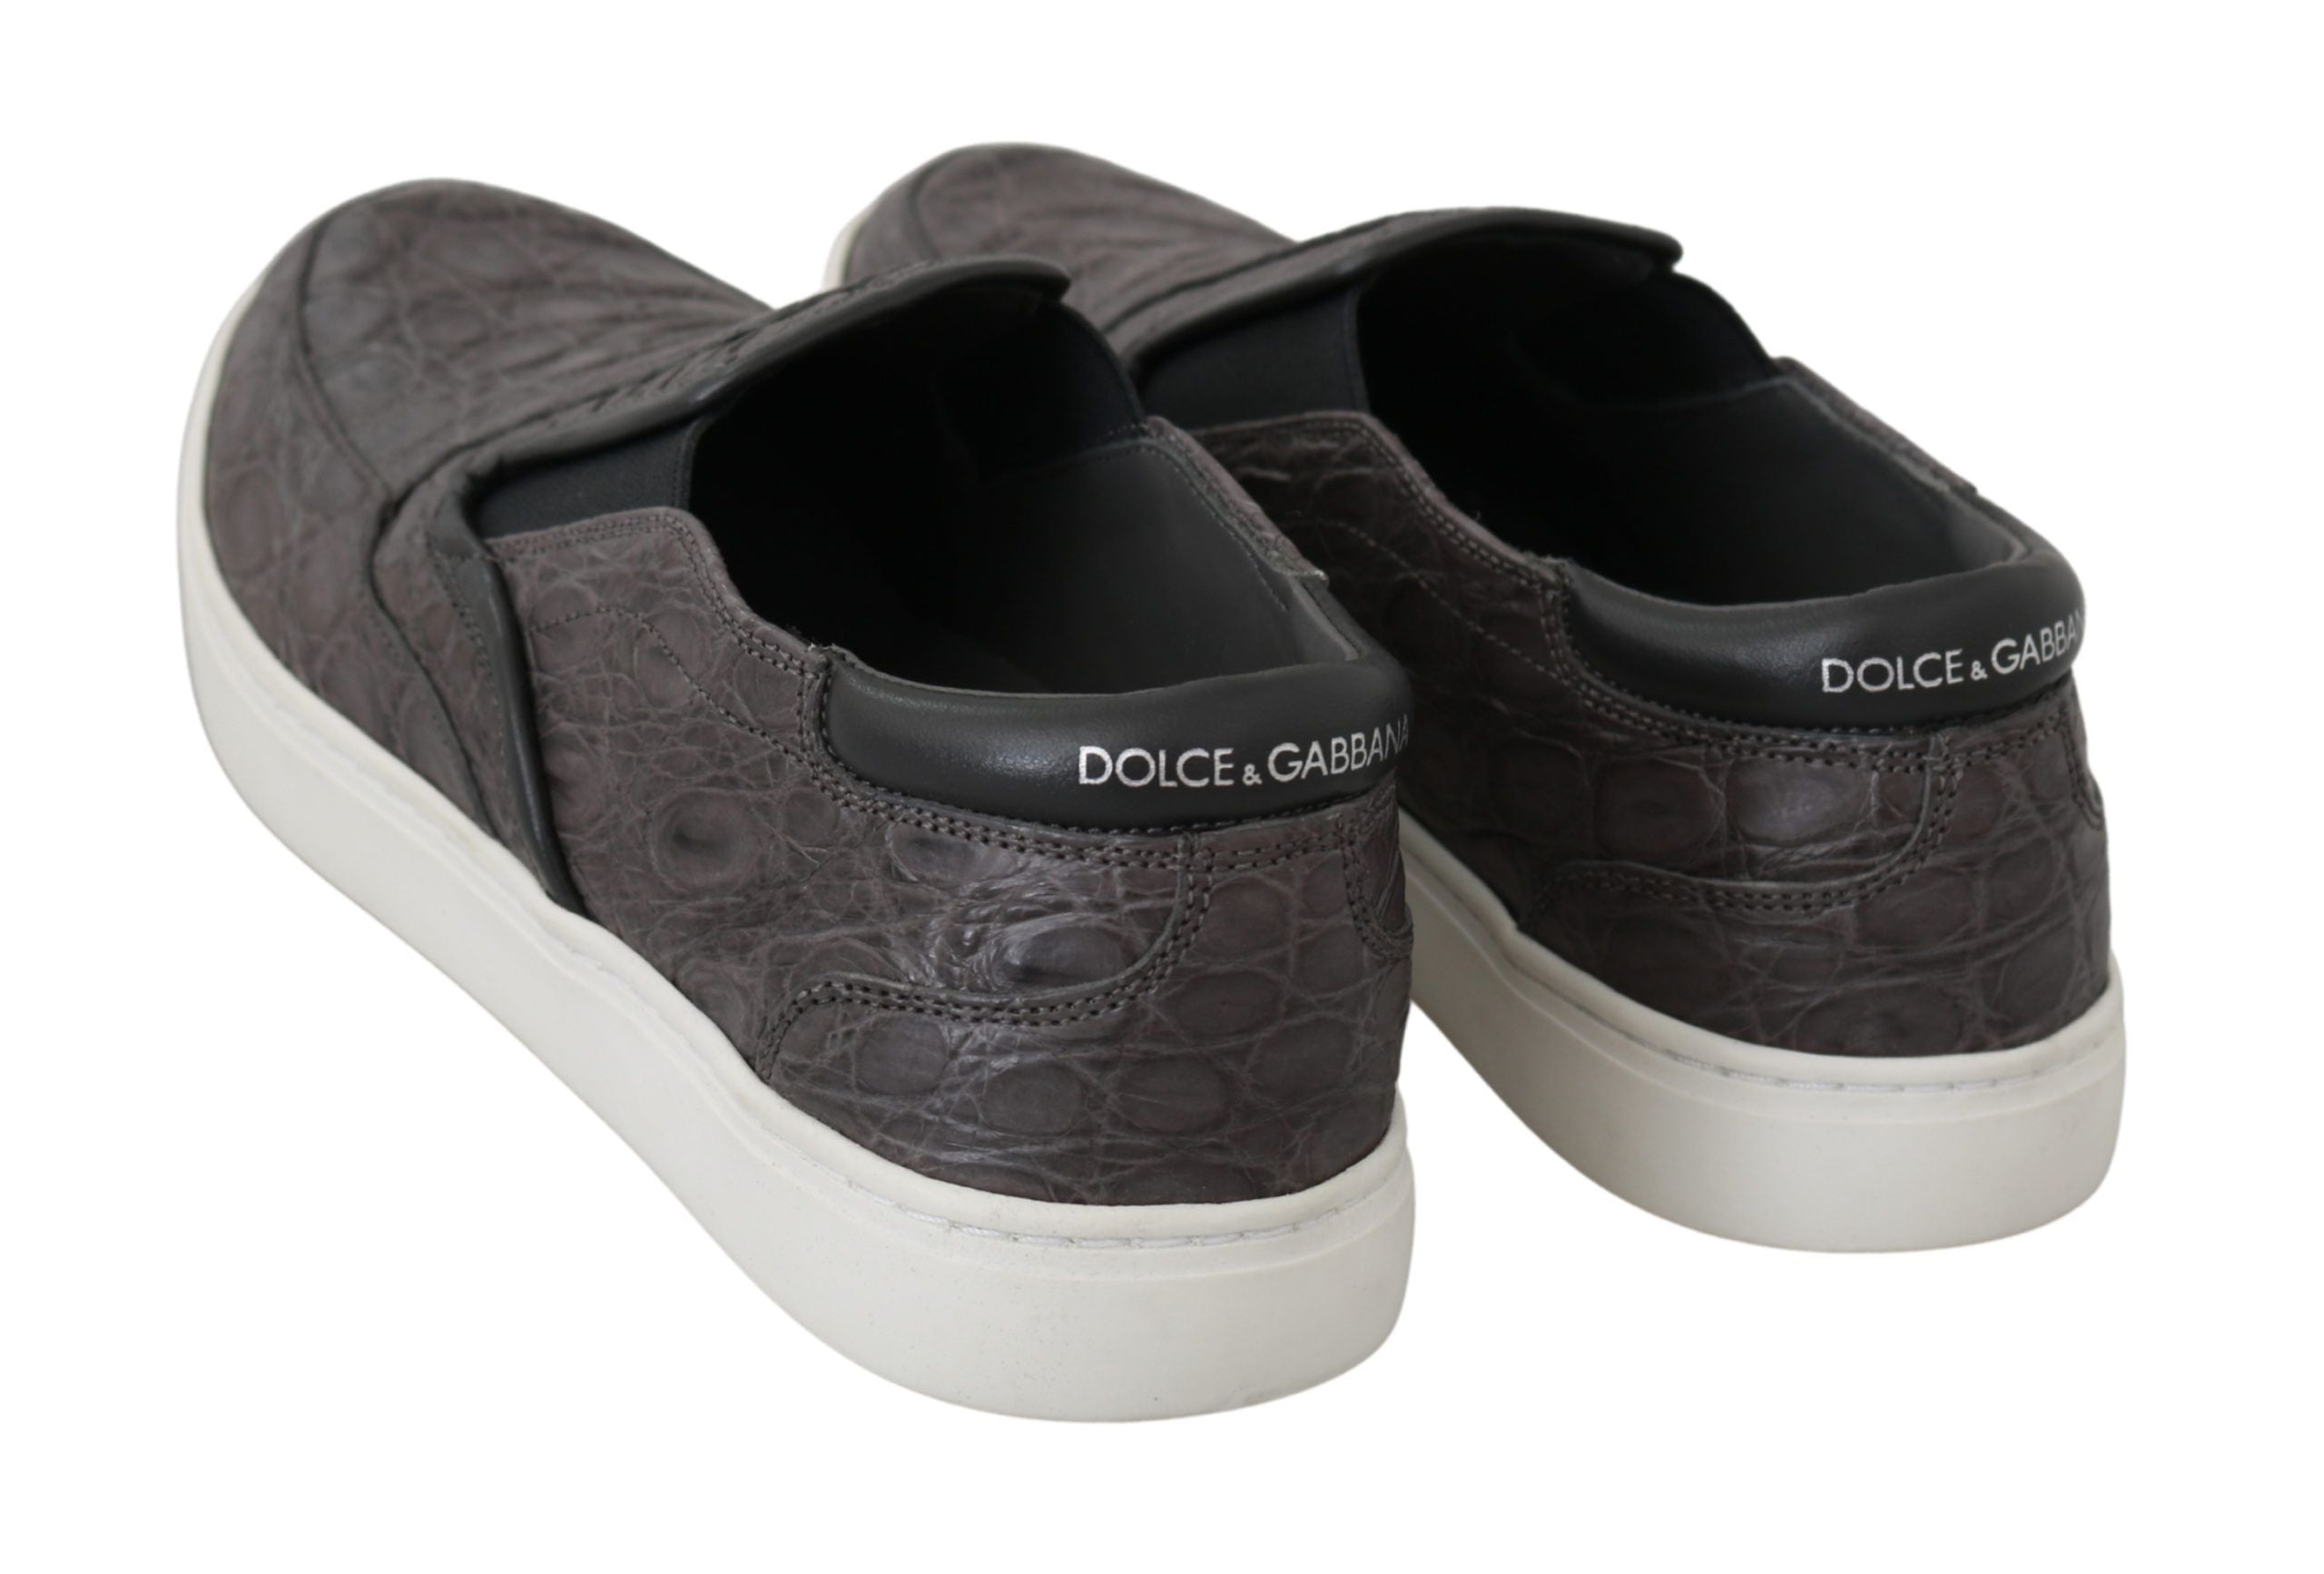 Dolce & Gabbana Elegant Gray Caiman Leather Loafers